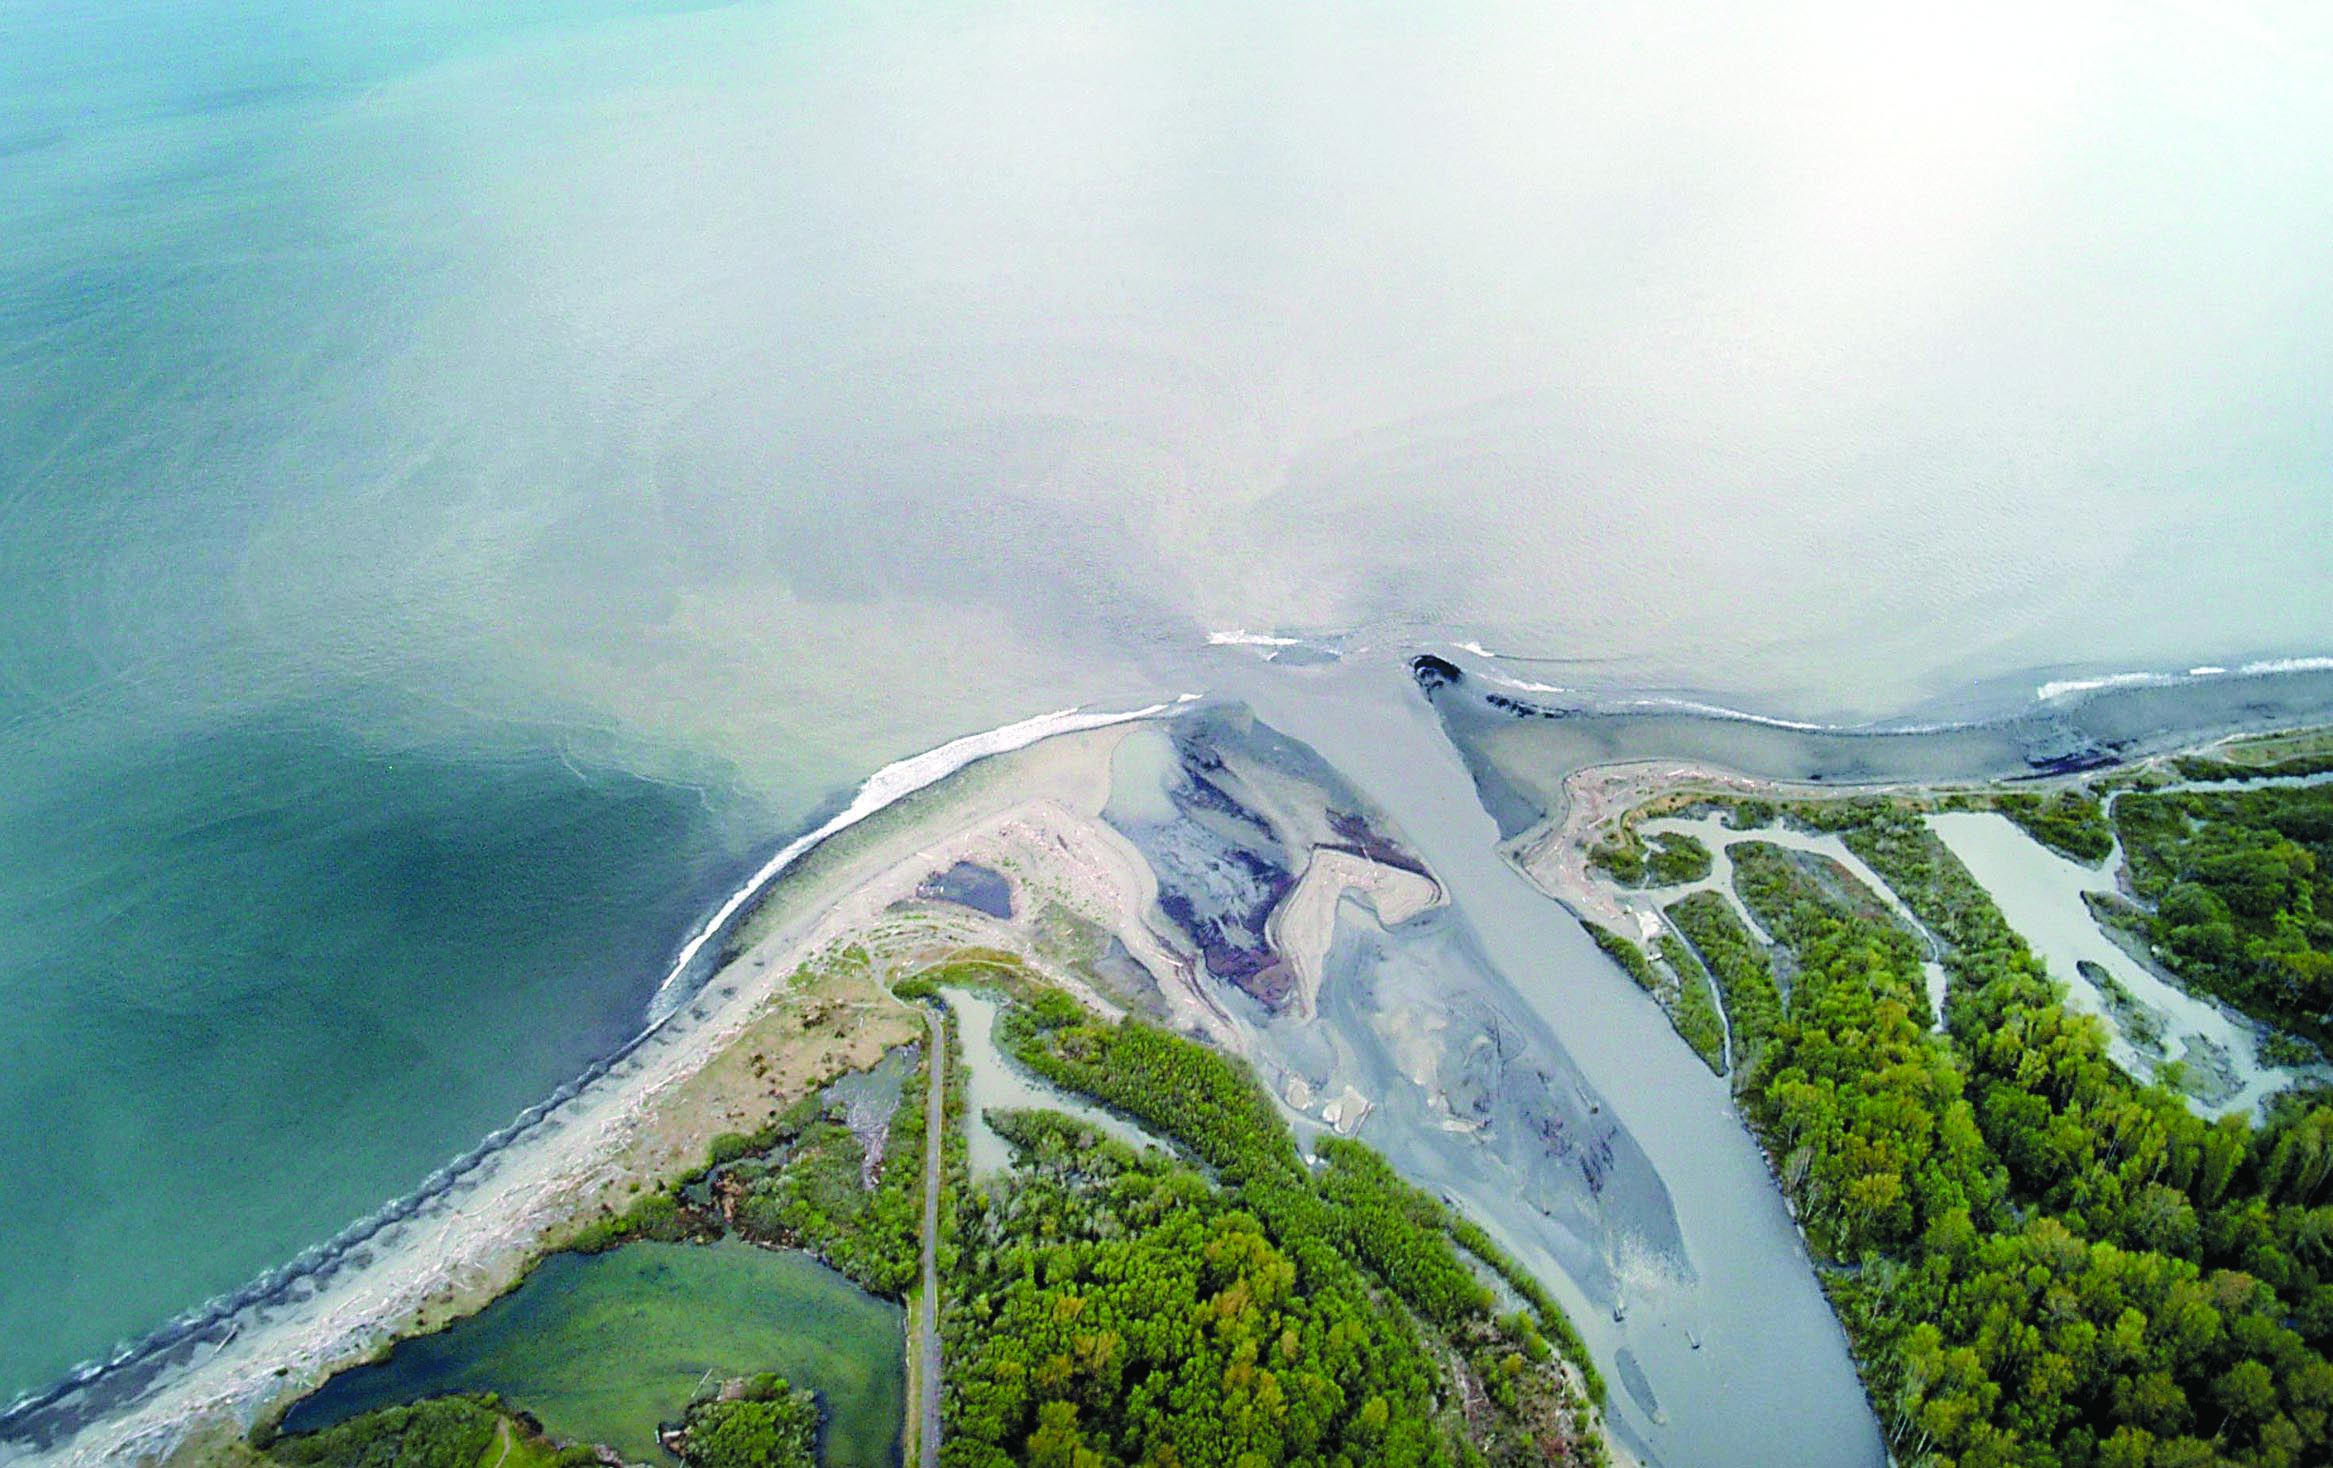 Sediment flows out of the mouth of the Elwha River into the Strait of Juan de Fuca on Friday as the river cuts through nearly a century of silt collected behind two dams being now removed upstream as seen in this aerial photo.  -- Keith Thorpe/Peninsula Daily News